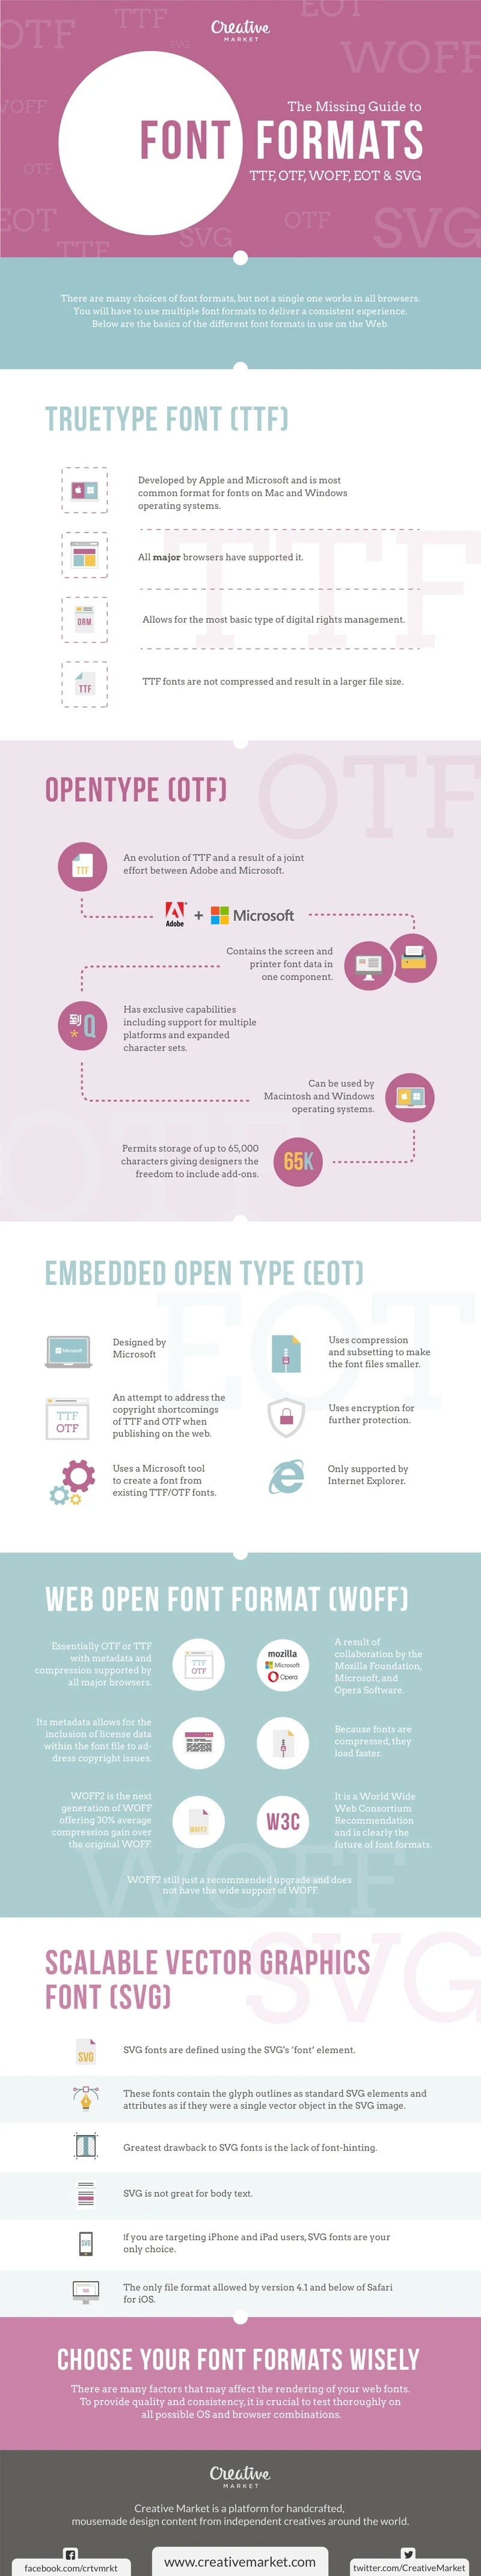 The Missing Guide to Font Formats: TTF, OTF, WOFF, EOT &amp; SVG - #infographic